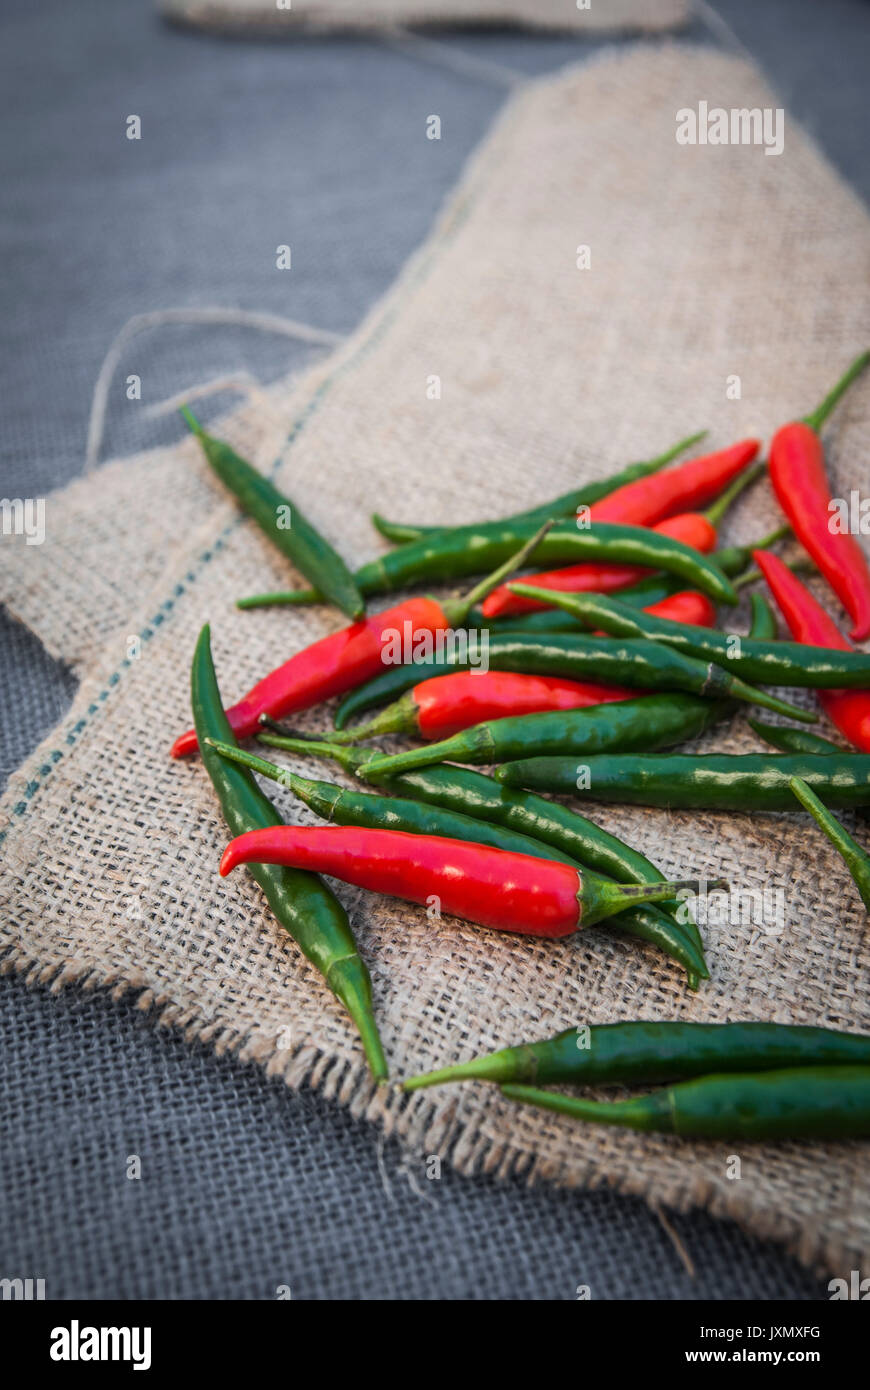 Still life of red and green chilli peppers on fabric Stock Photo